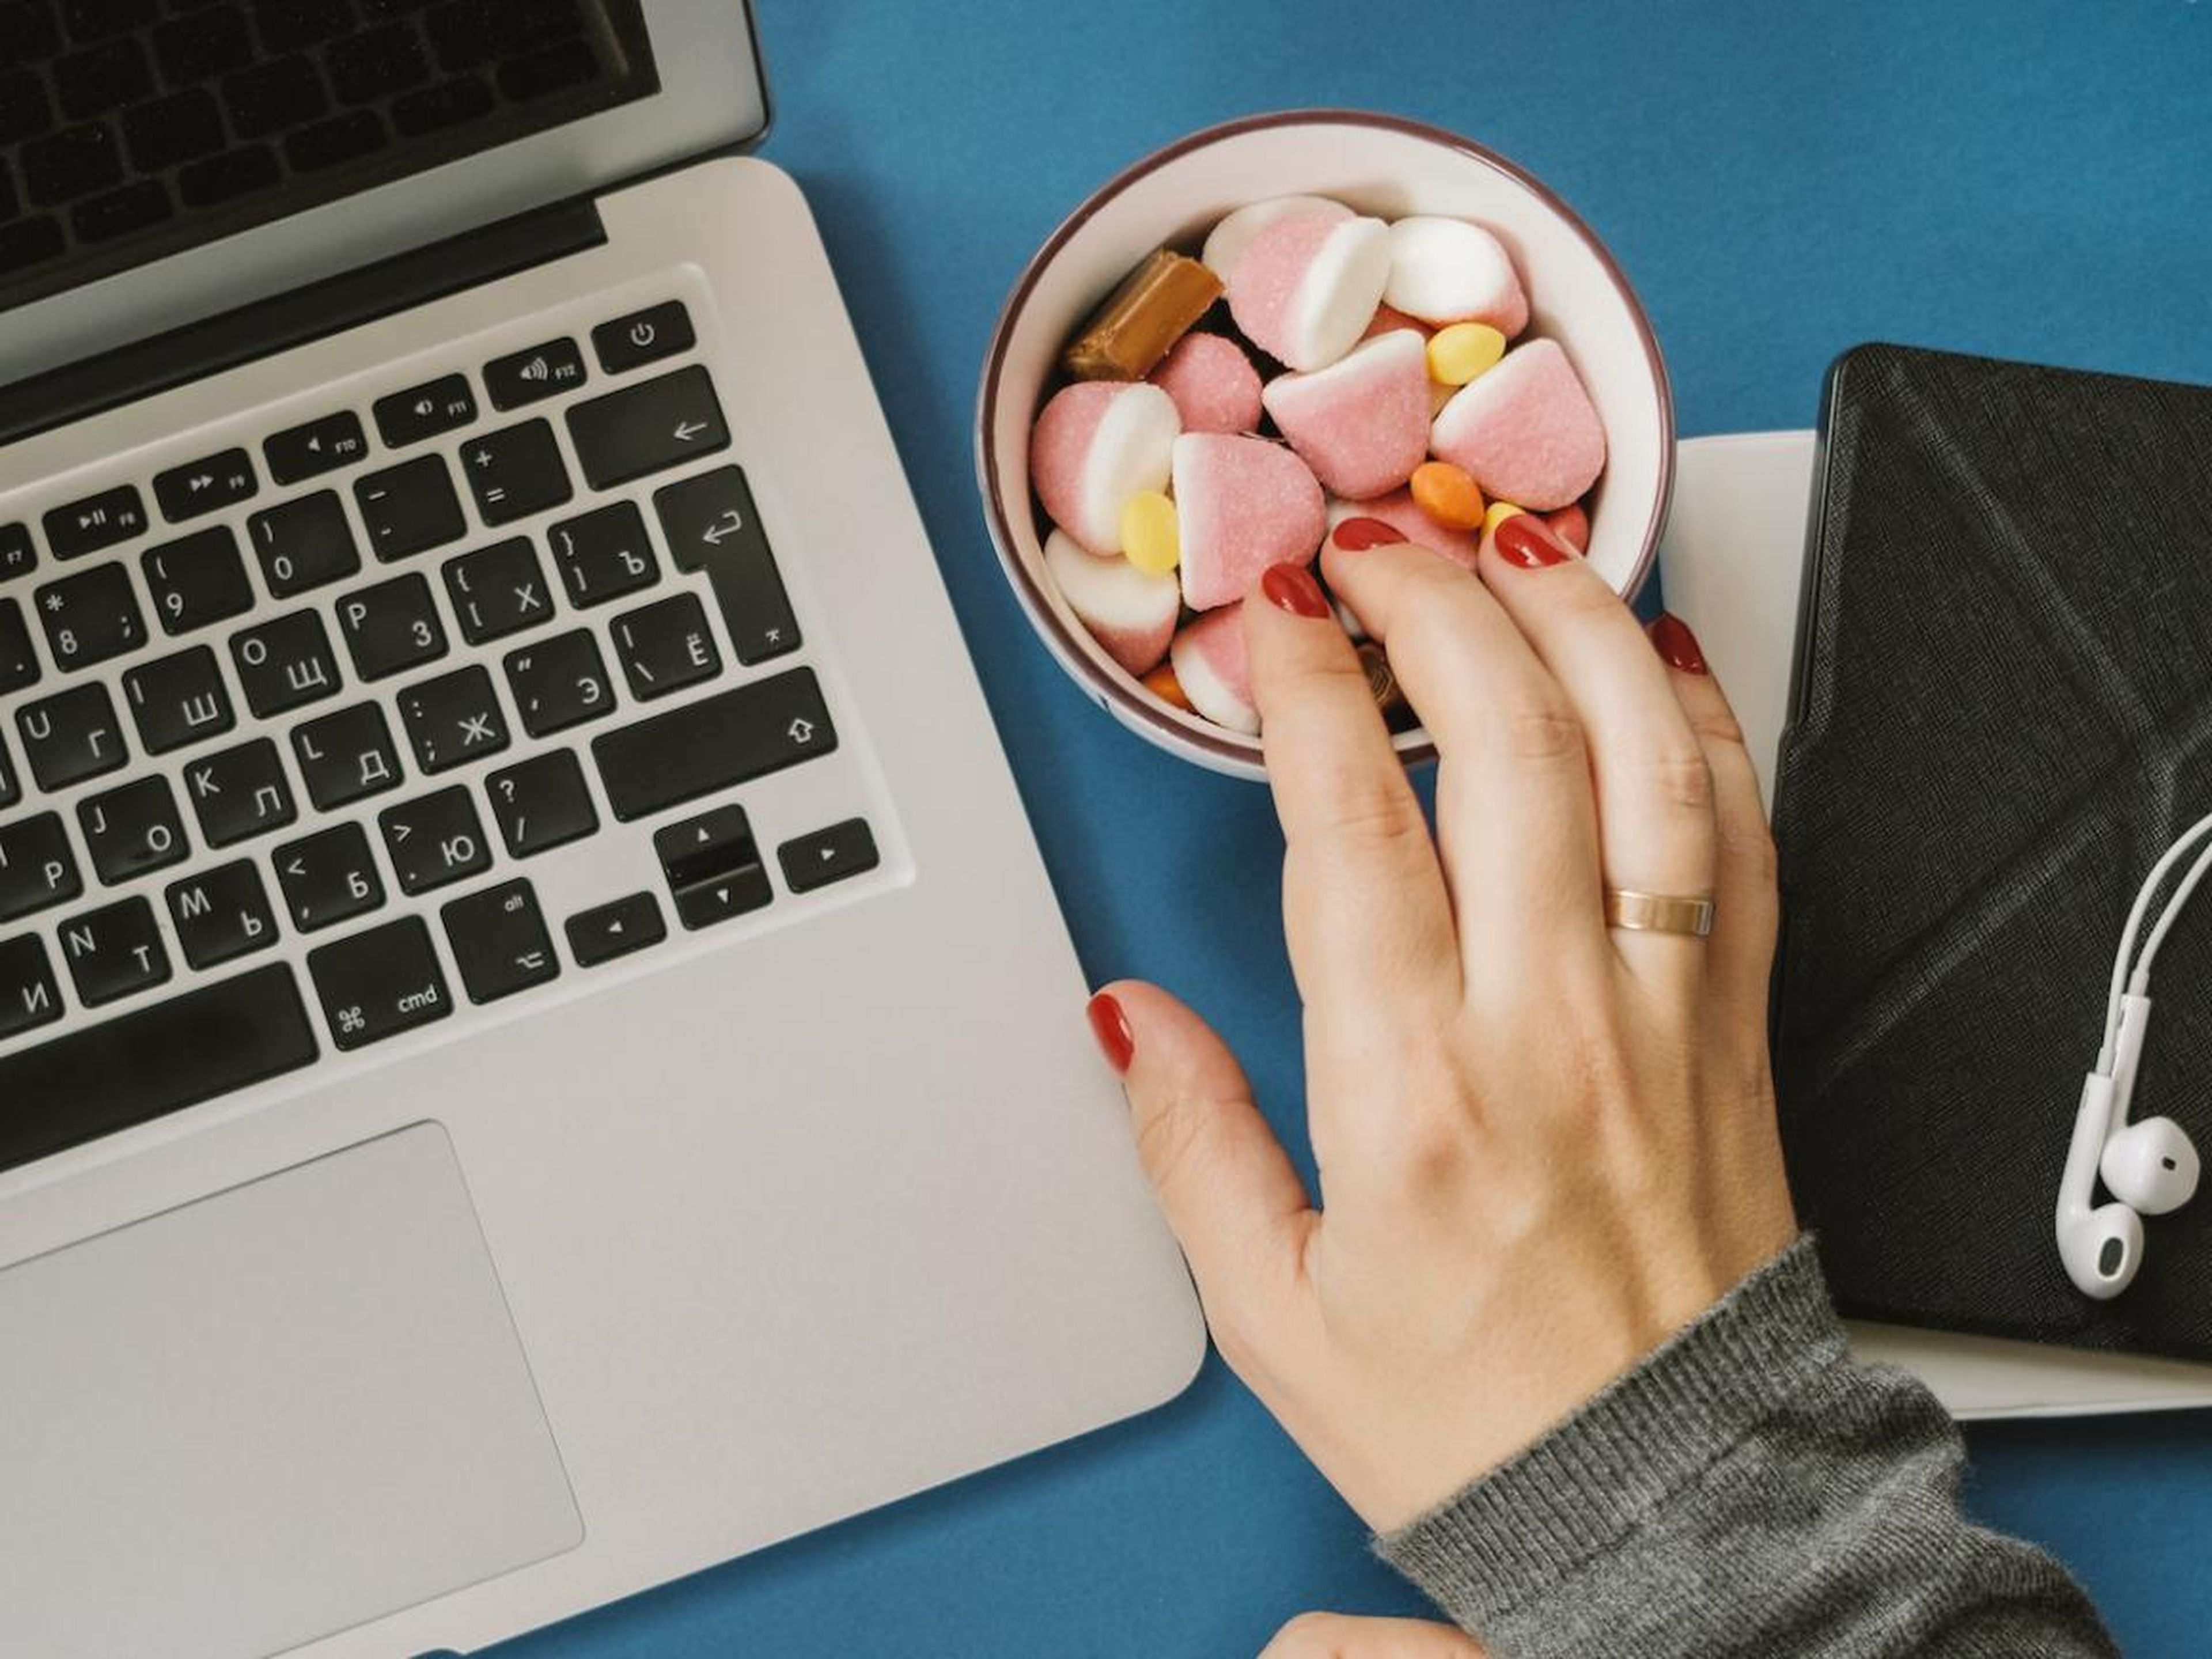 Keep sweets away from your desk to avoid temptation.